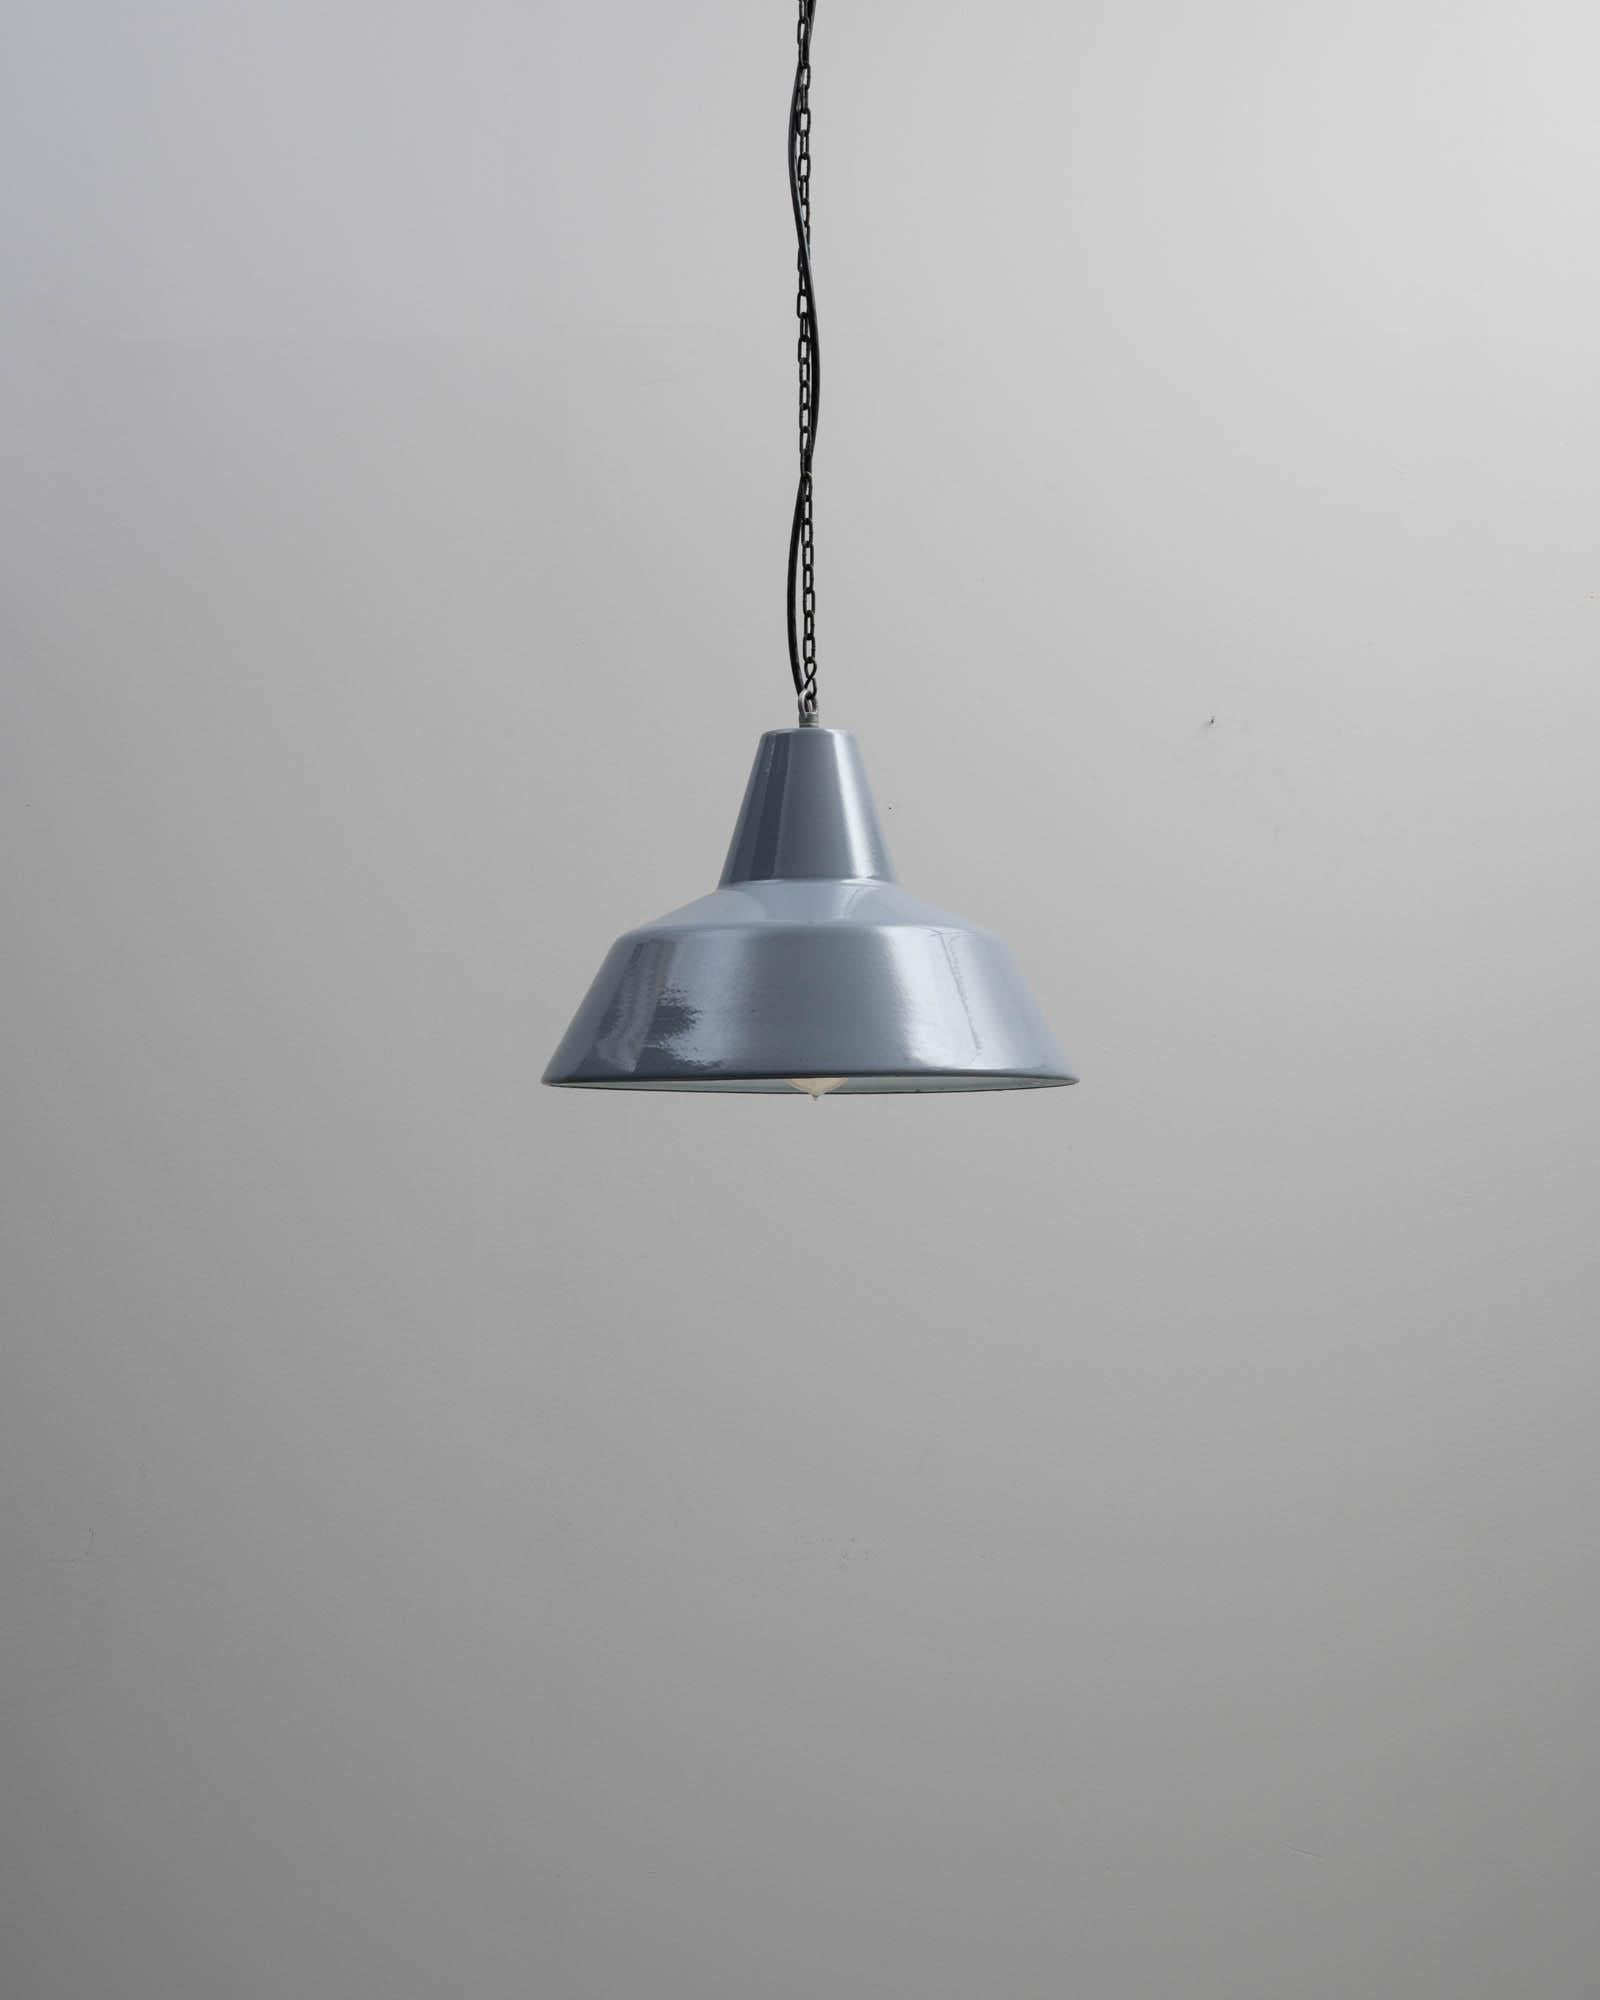 An industrial style metal lighting fixture created in 20th century France. Neatly composed and satisfyingly minimal, this mid-century style lighting fixture effortlessly exudes a chic sense of style. The simple metal shade is coated with a luscious